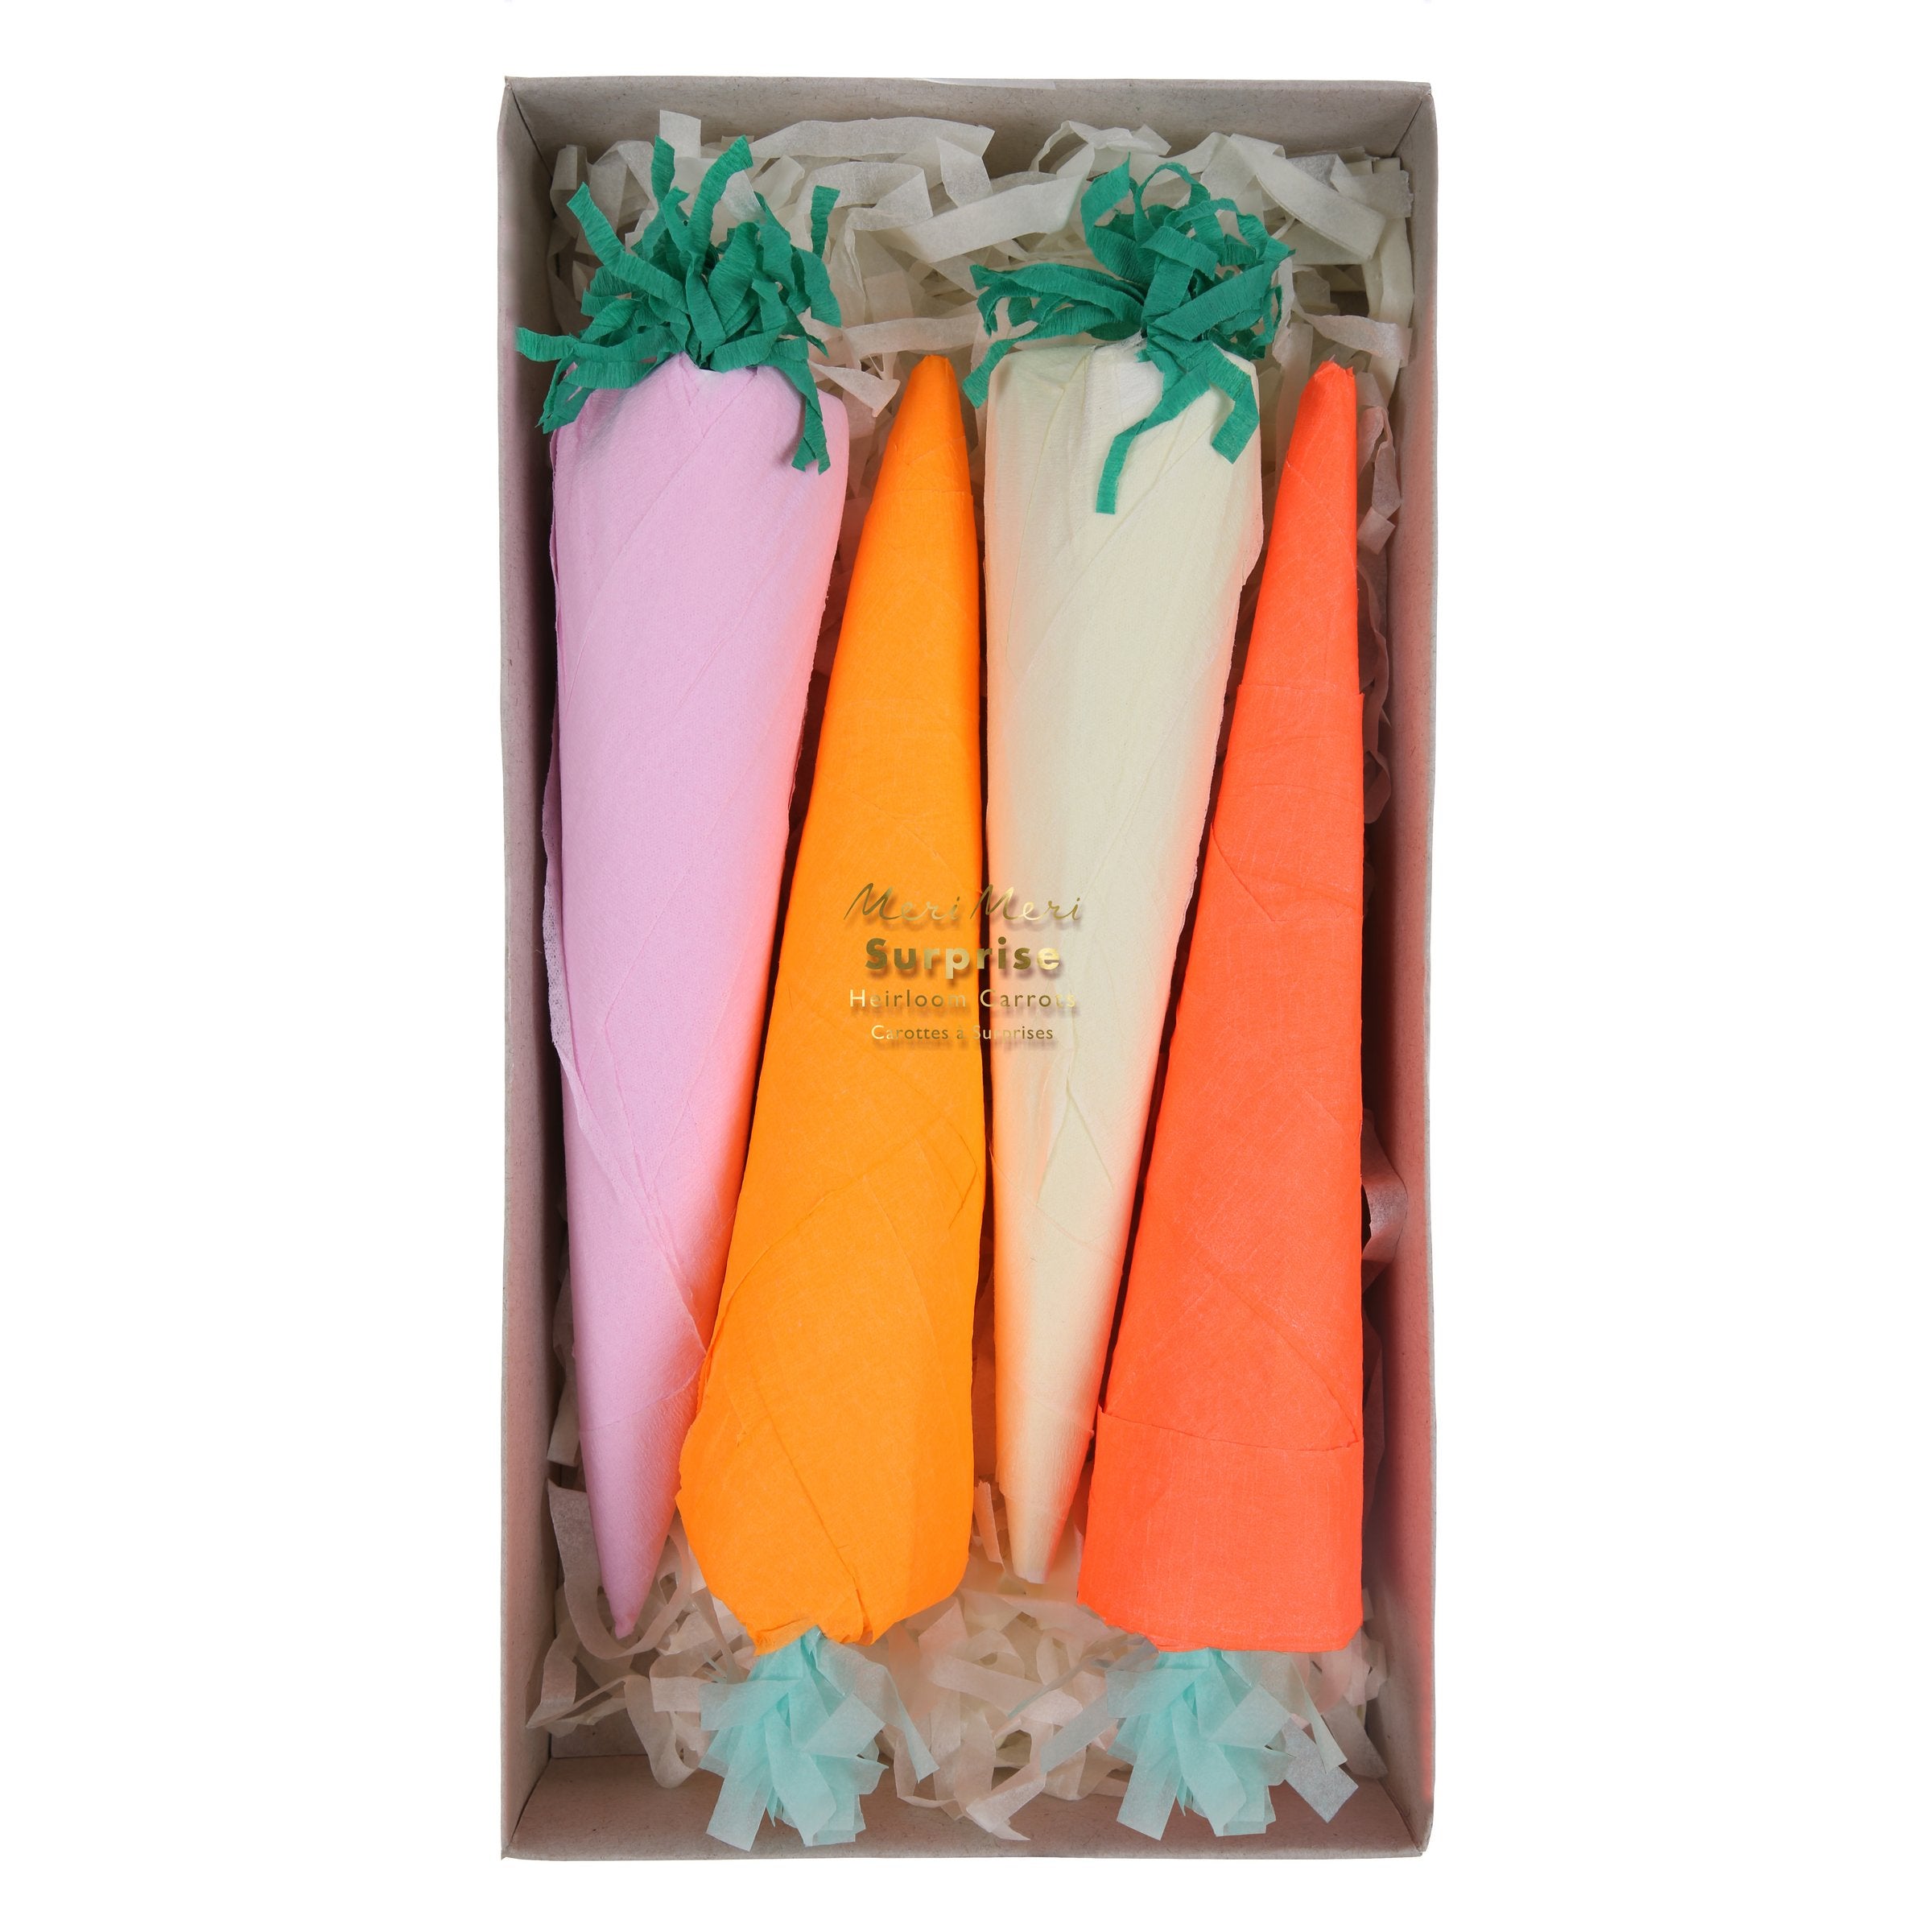 These surprise carrots are crafted from colorful crepe paper, and each contain a fluffy chick, 2 tempororary tattoos and a joke